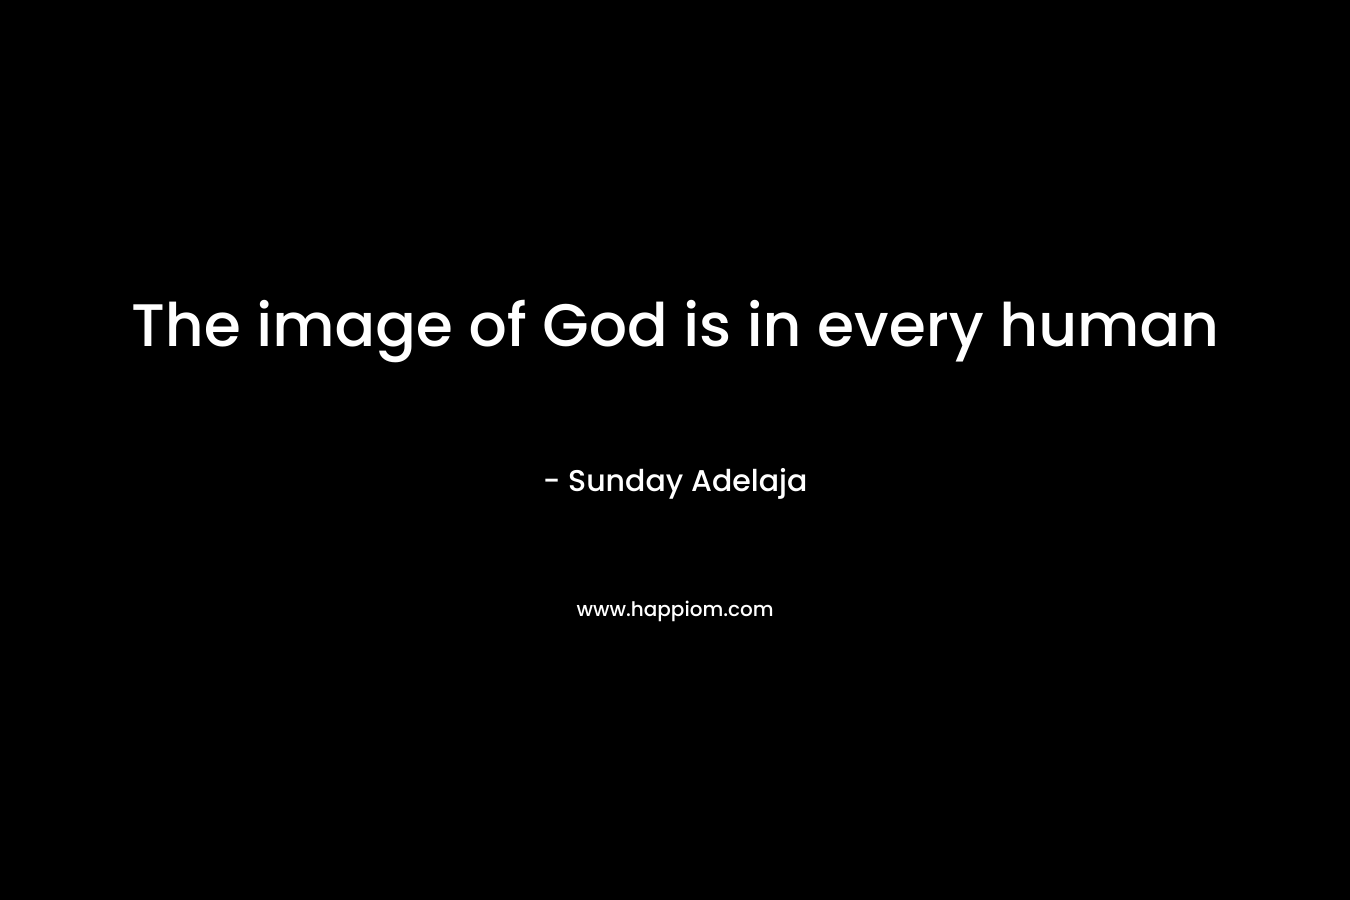 The image of God is in every human